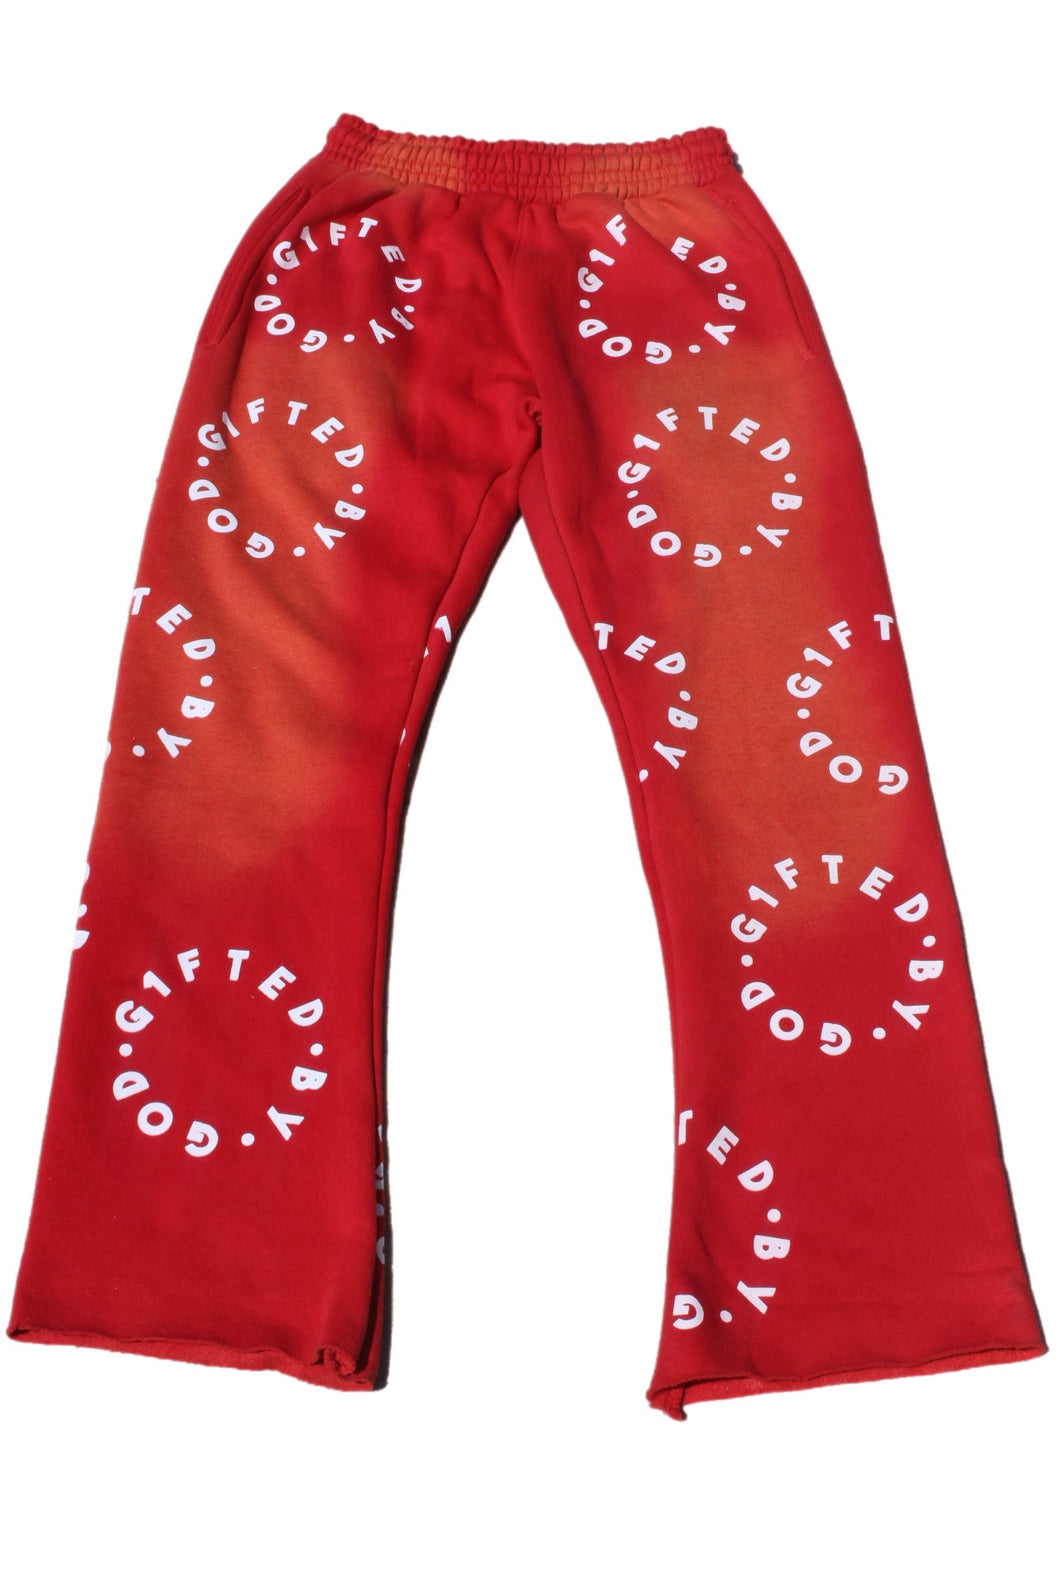 GBG Flare Sweatpants (Red/White)